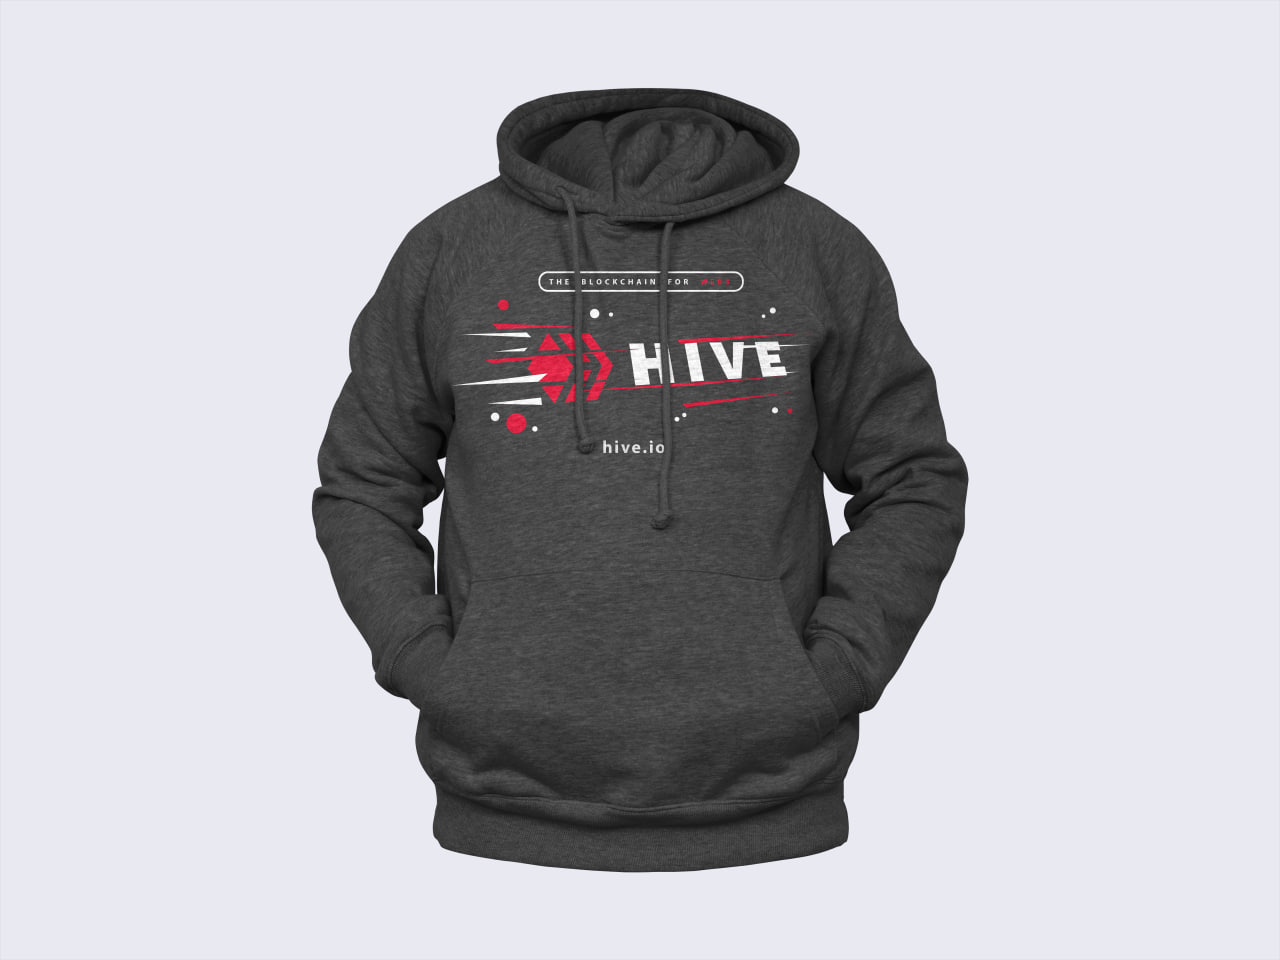 @mcsamm/introducing-my-new-hive-branded-hoodie-for-effective-promotion